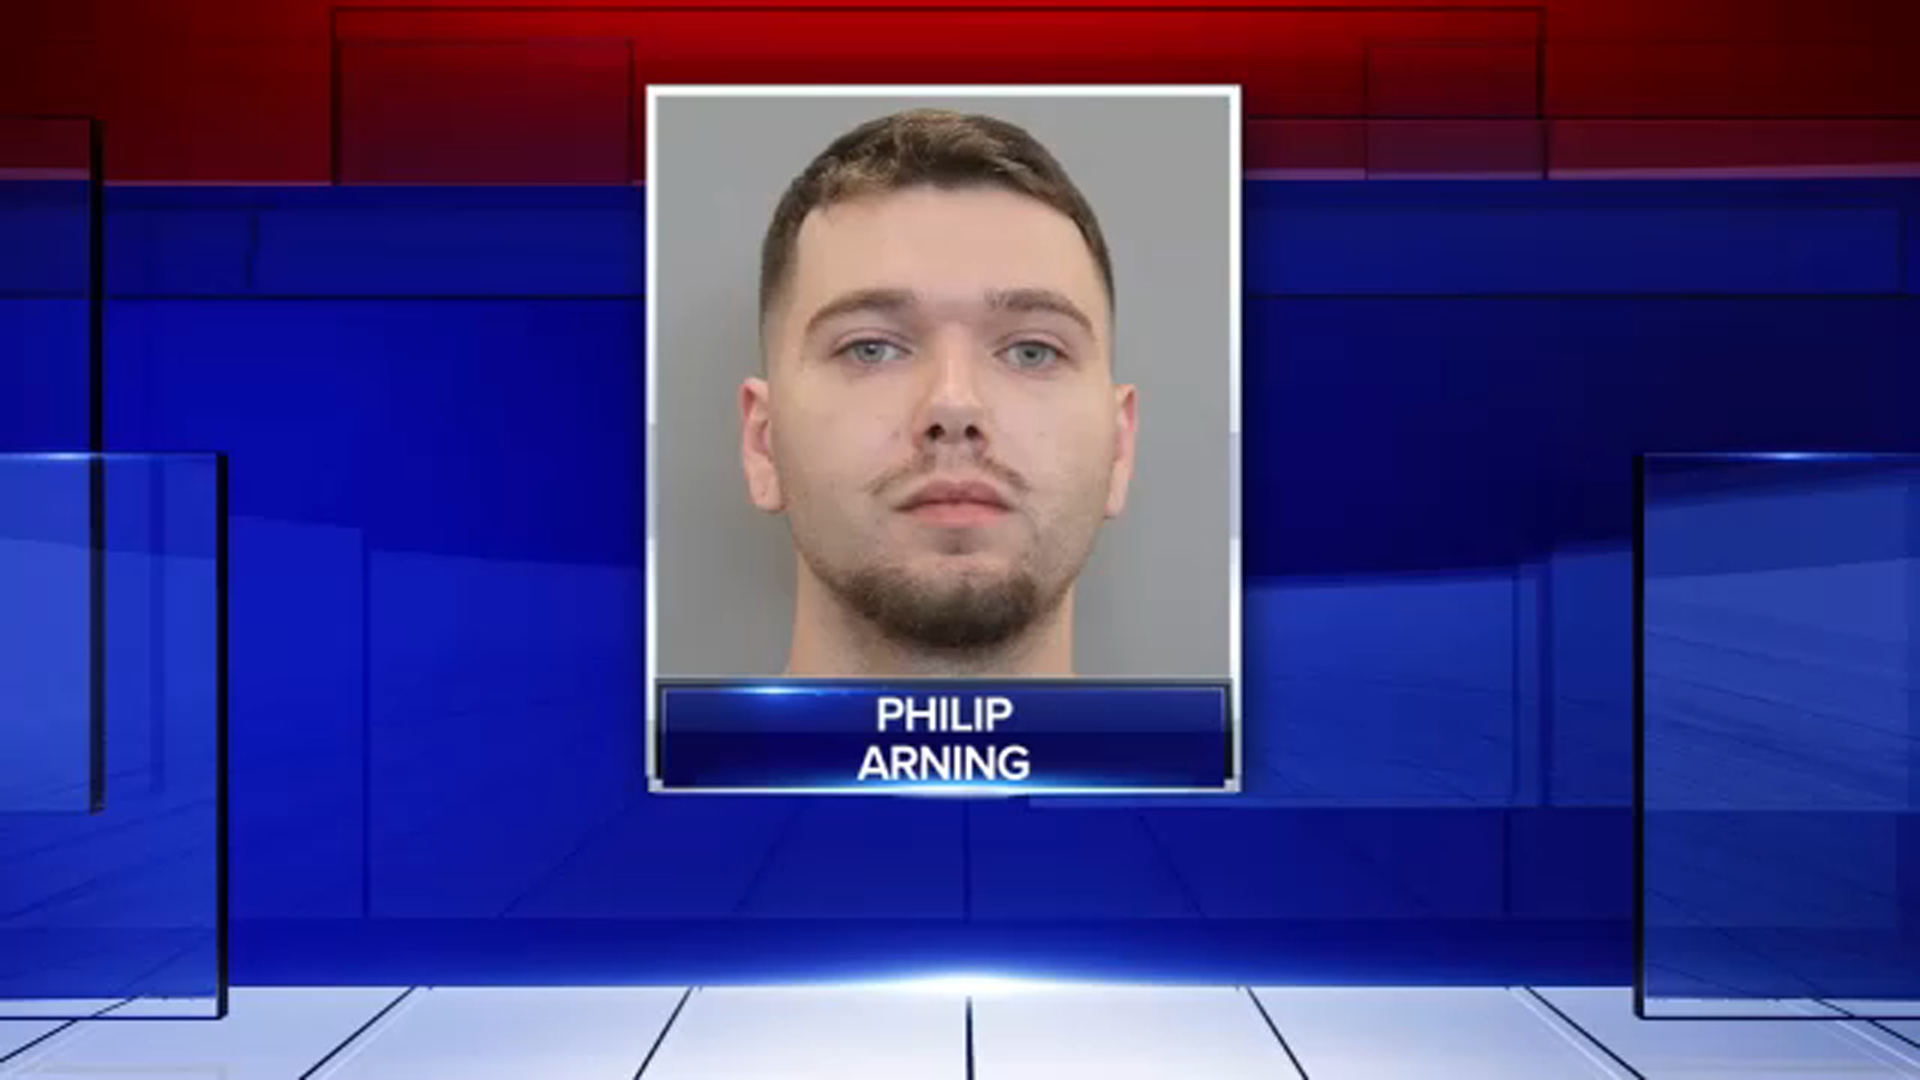 Houston, Texas shooting Mugshot released of Philip Arning, charged with murdering girlfriends ex Adam Tobias at graduation party